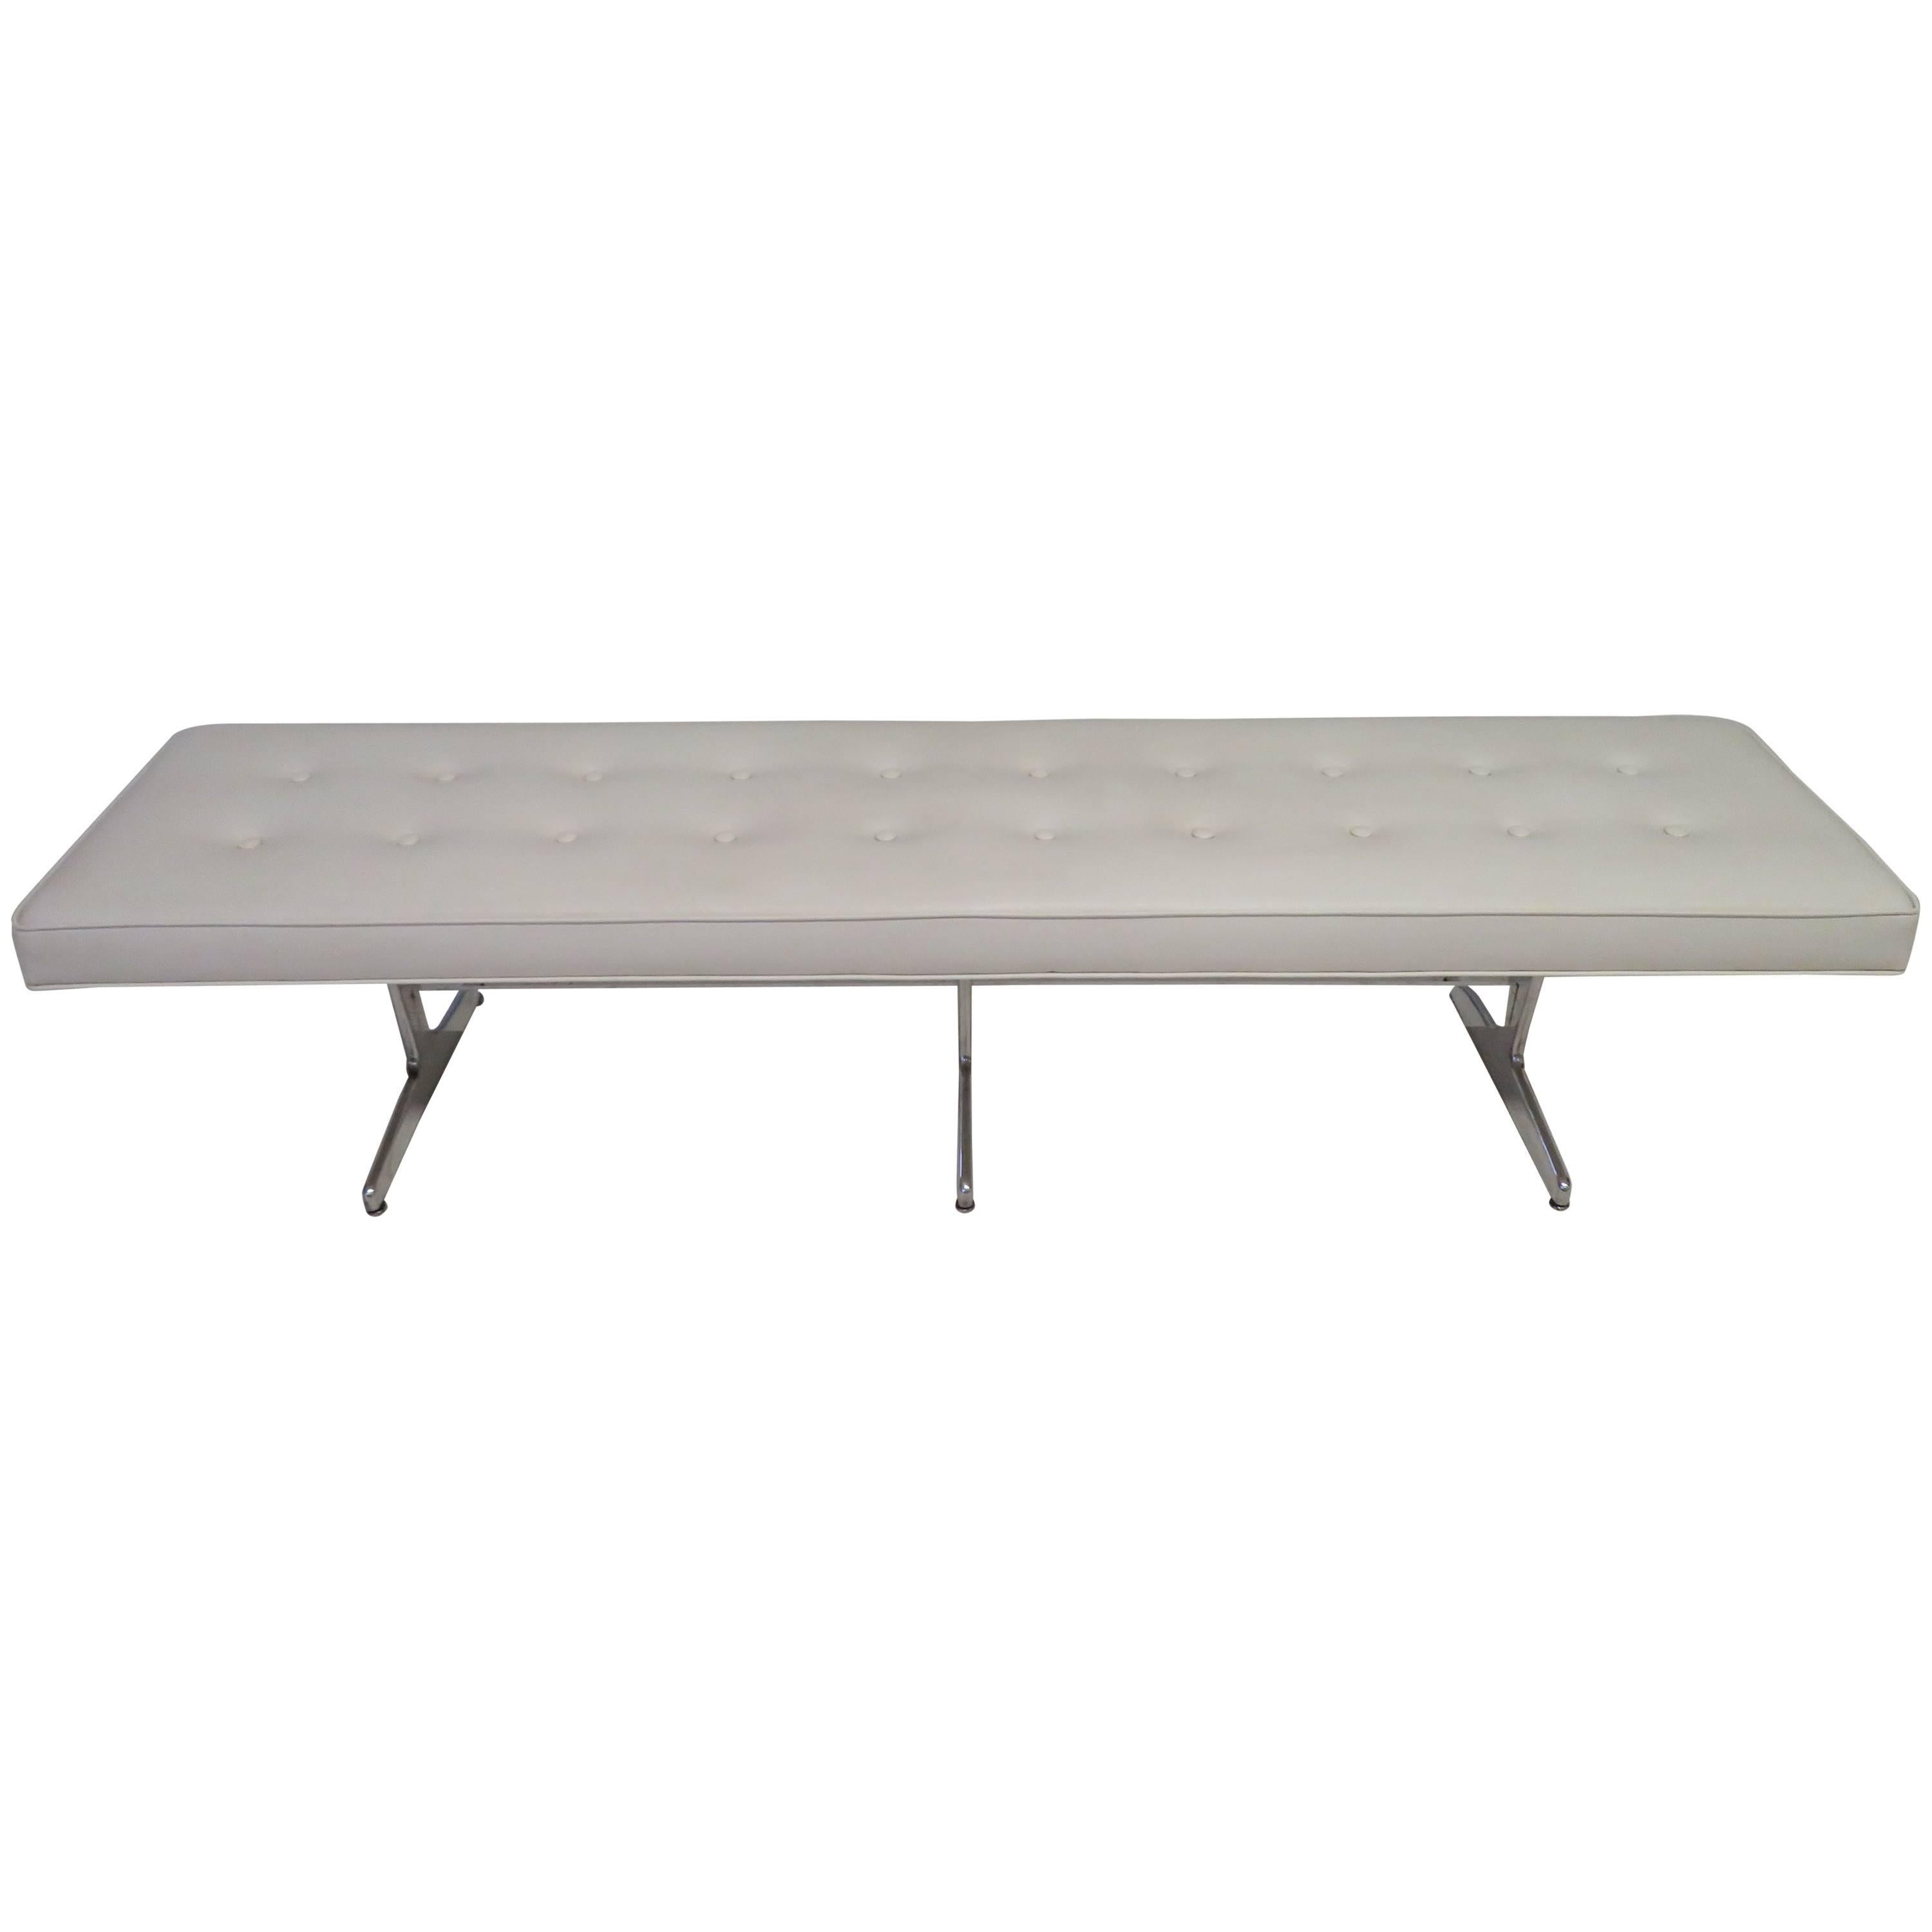 Magnificent Herman Miller Style Long Faux Leather Tufted Aluminum Base Bench